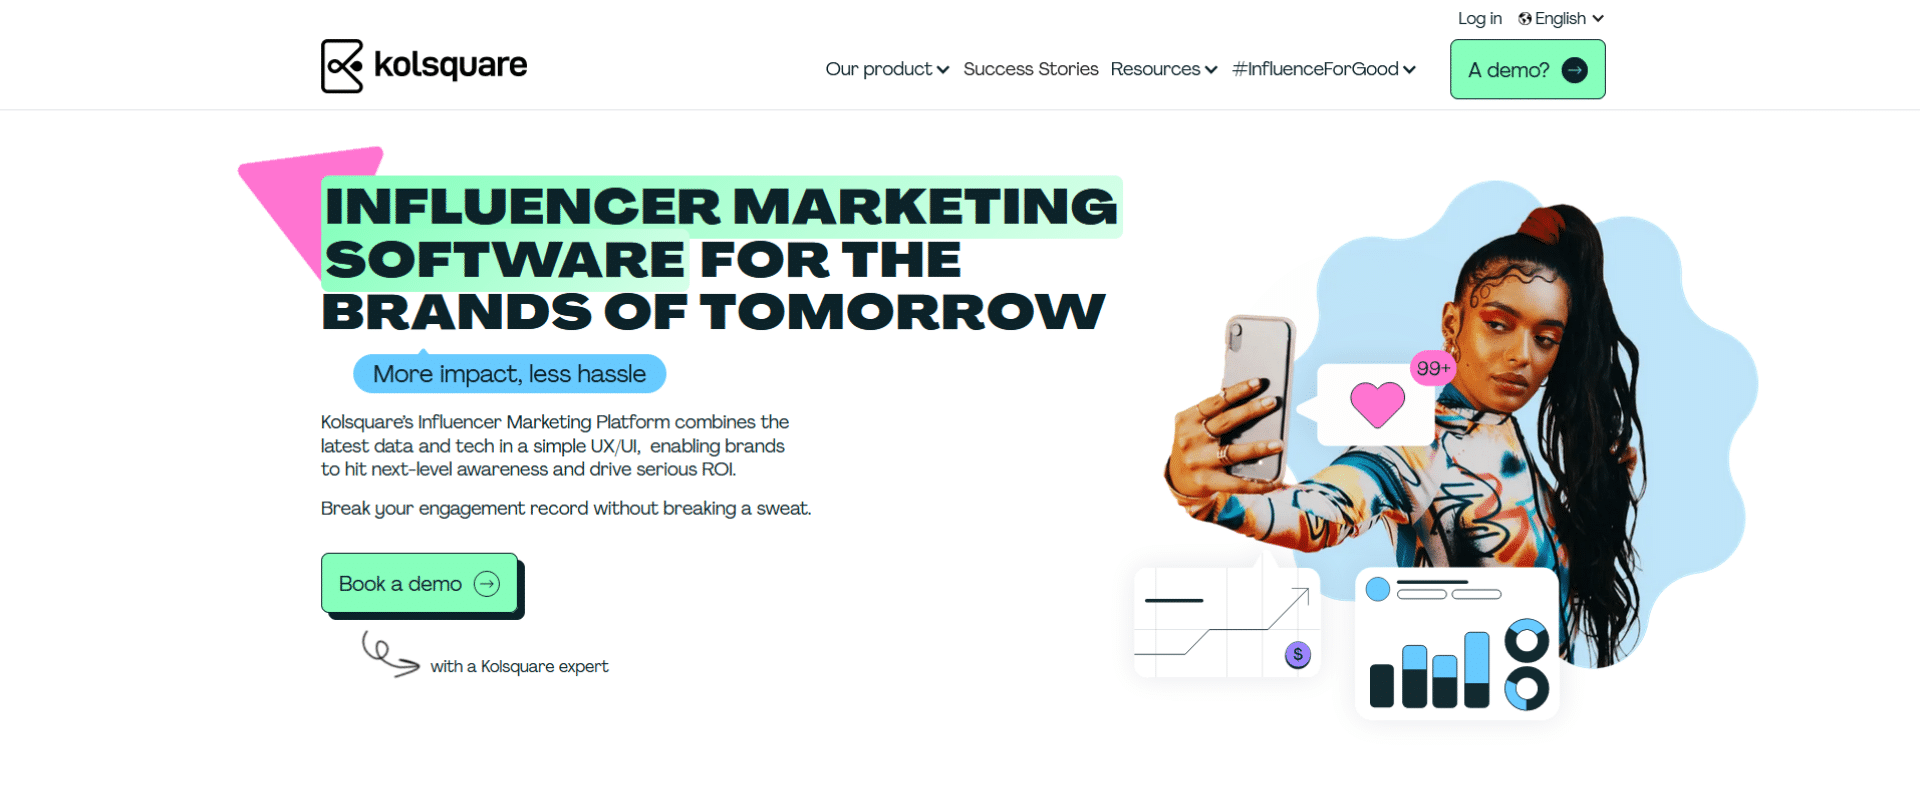 Kolsquare review: Influencer marketing software for the brands of tomorrow.